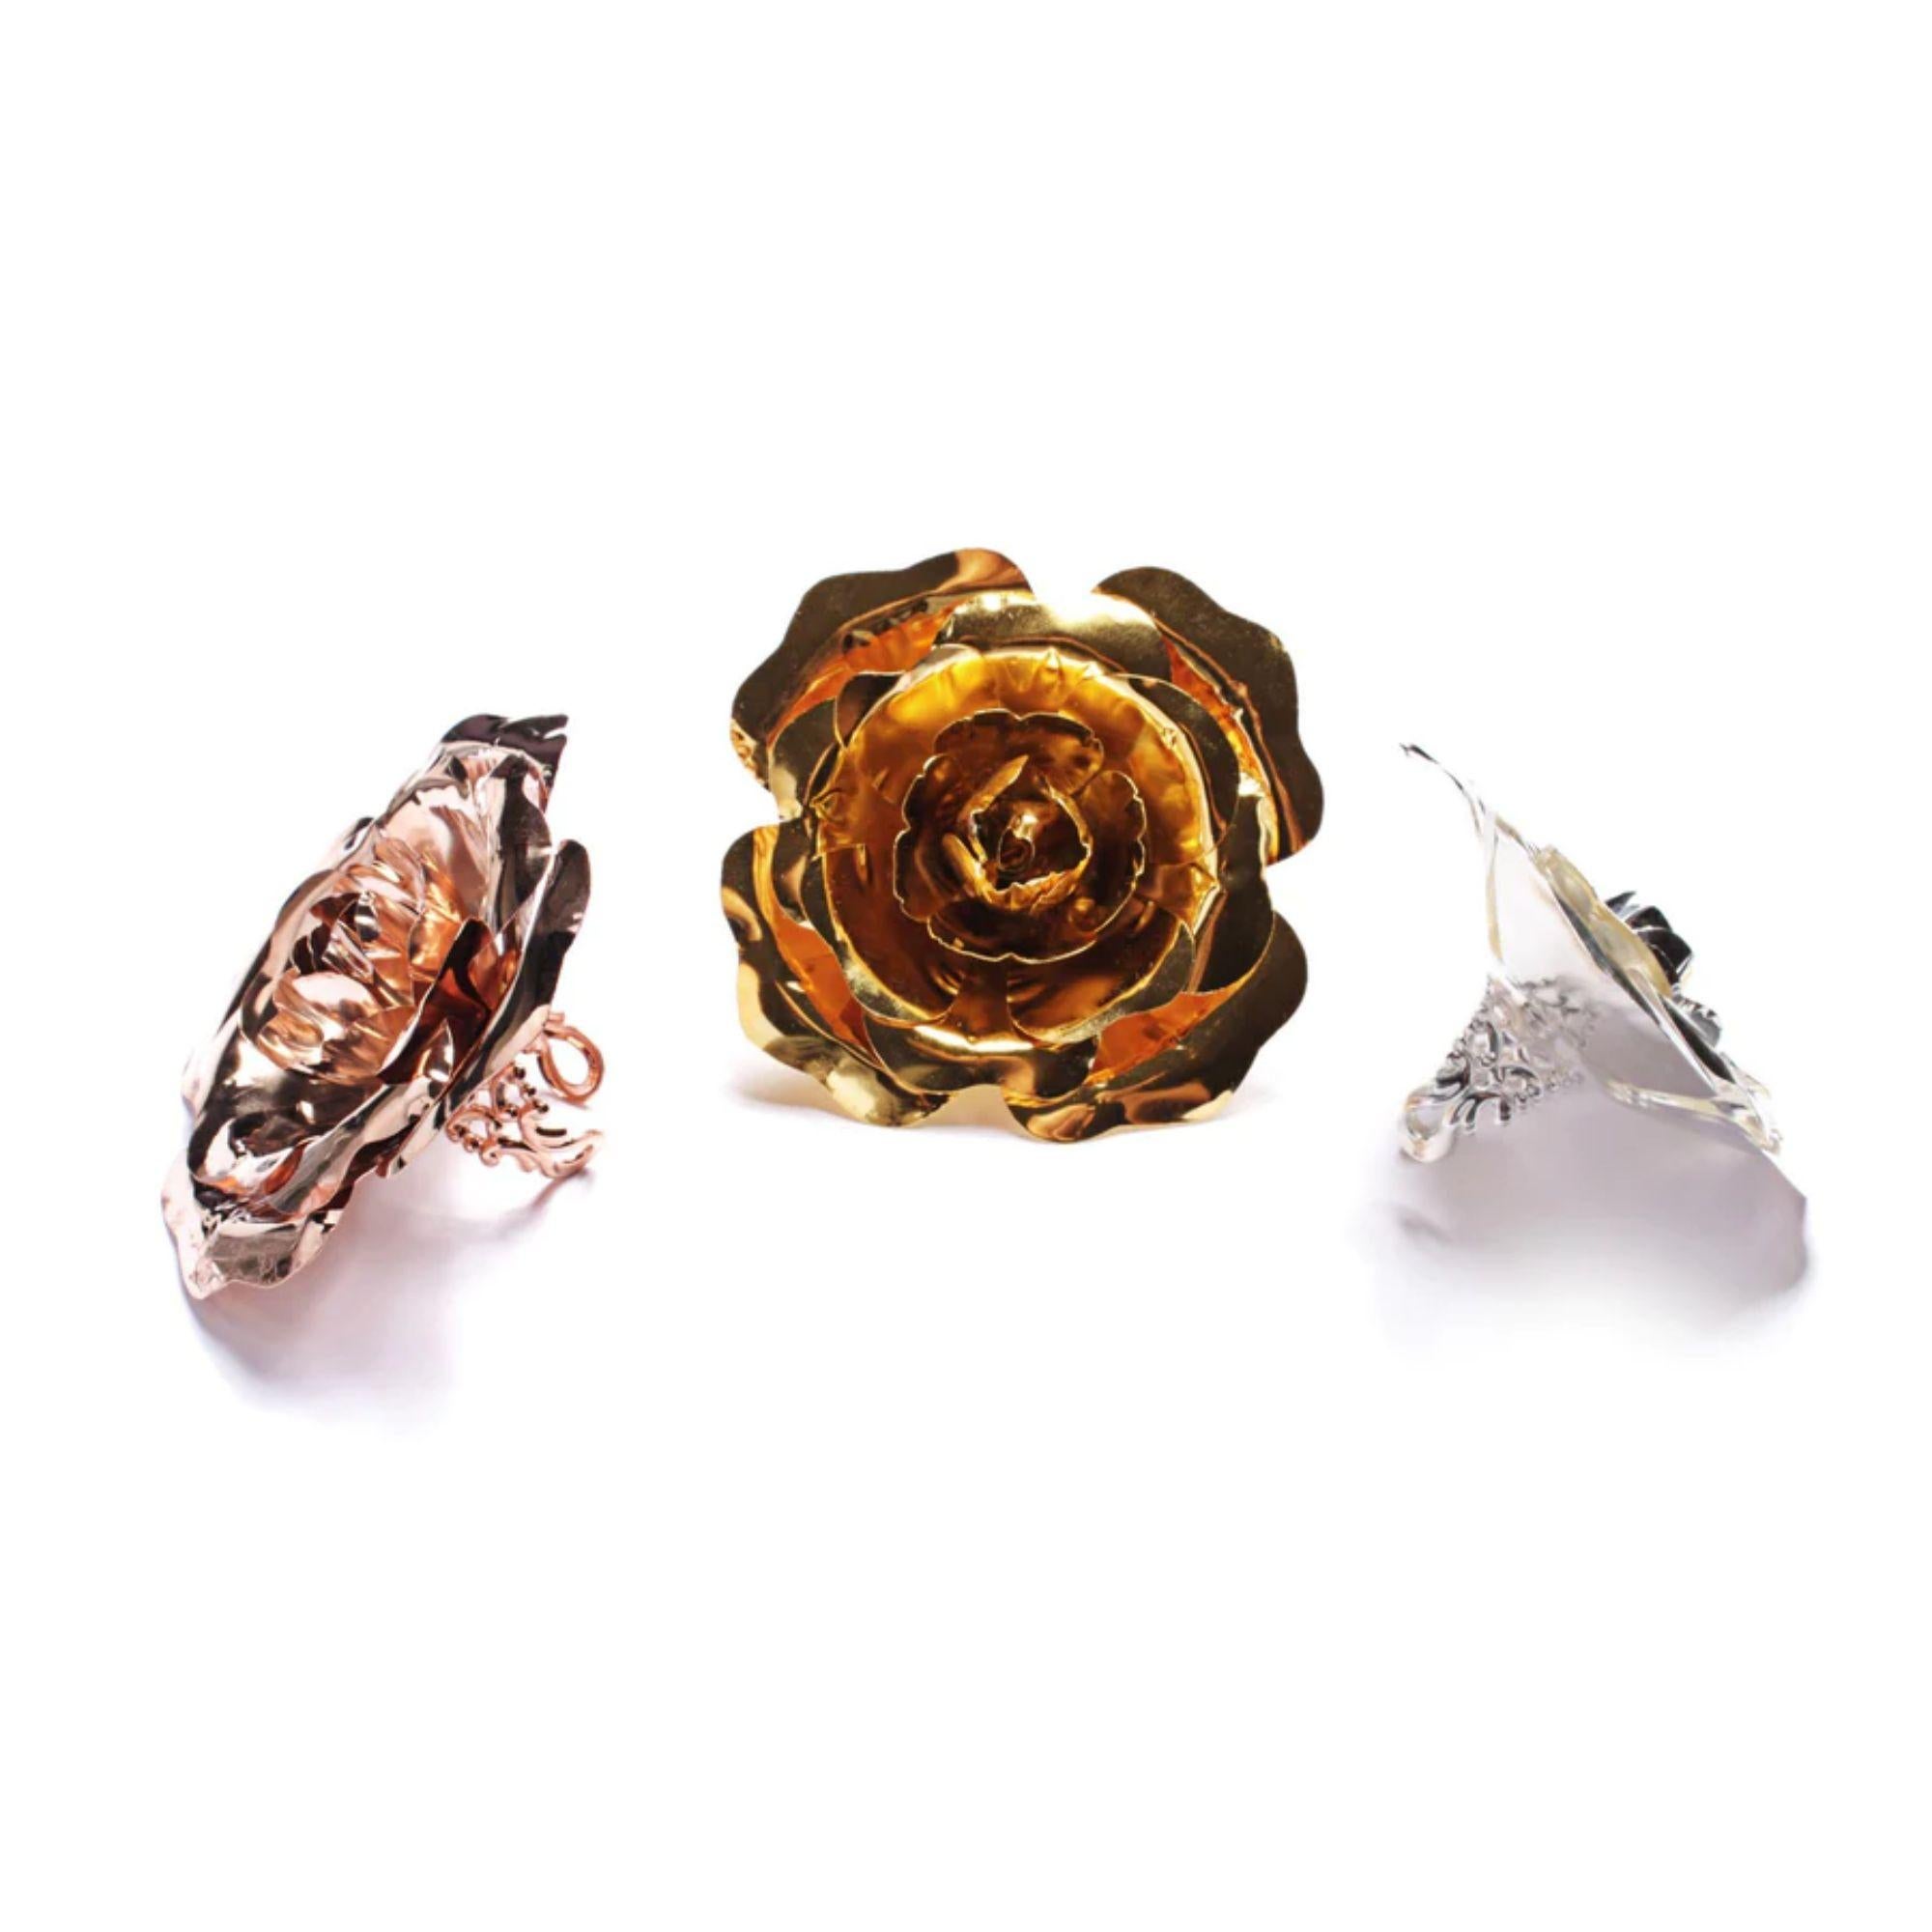 Statement rose ring to put a finishing touch. Goes great with the matching choker. Made in America. Plated on Brass

Additional Information:
Material: Brass, Sterling Silver
Dimensions: W 3.25 x L 3.25 x H 1.5 in
Available in other finish options: